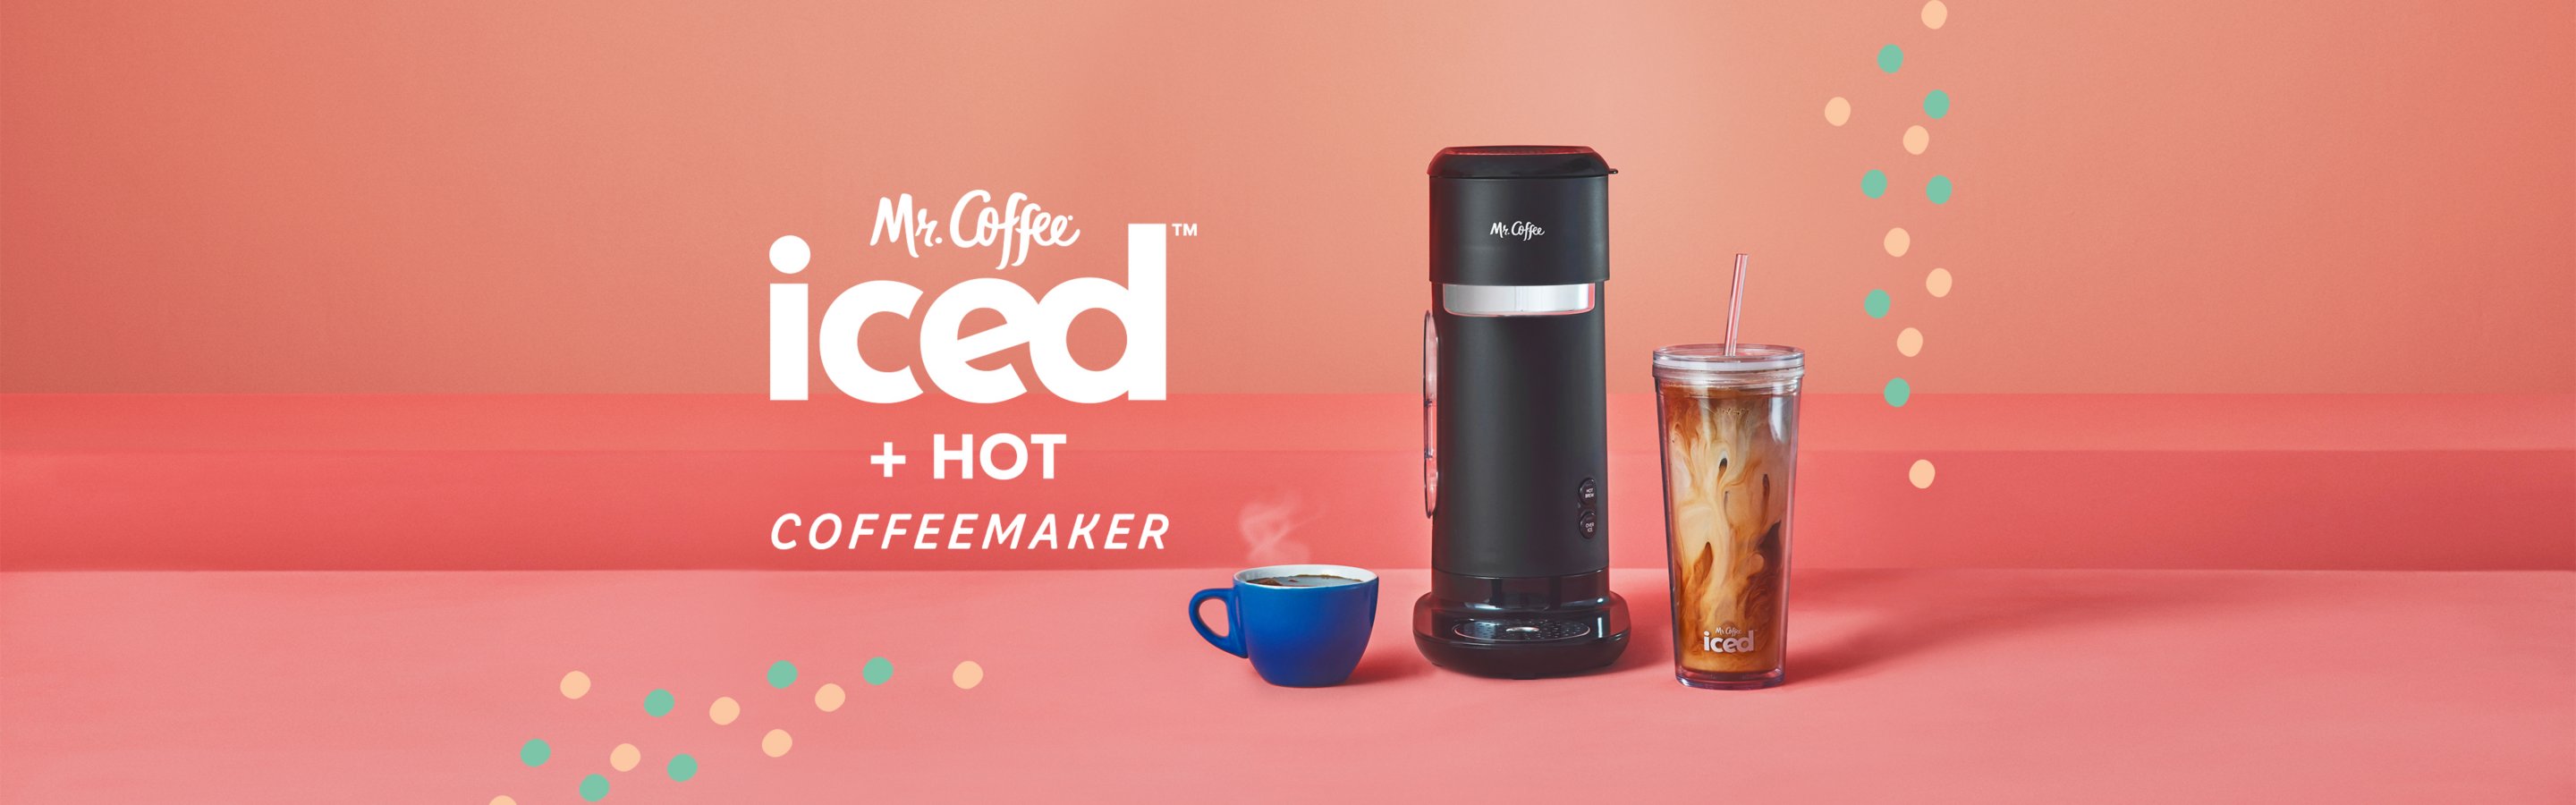 iced and hot coffee maker